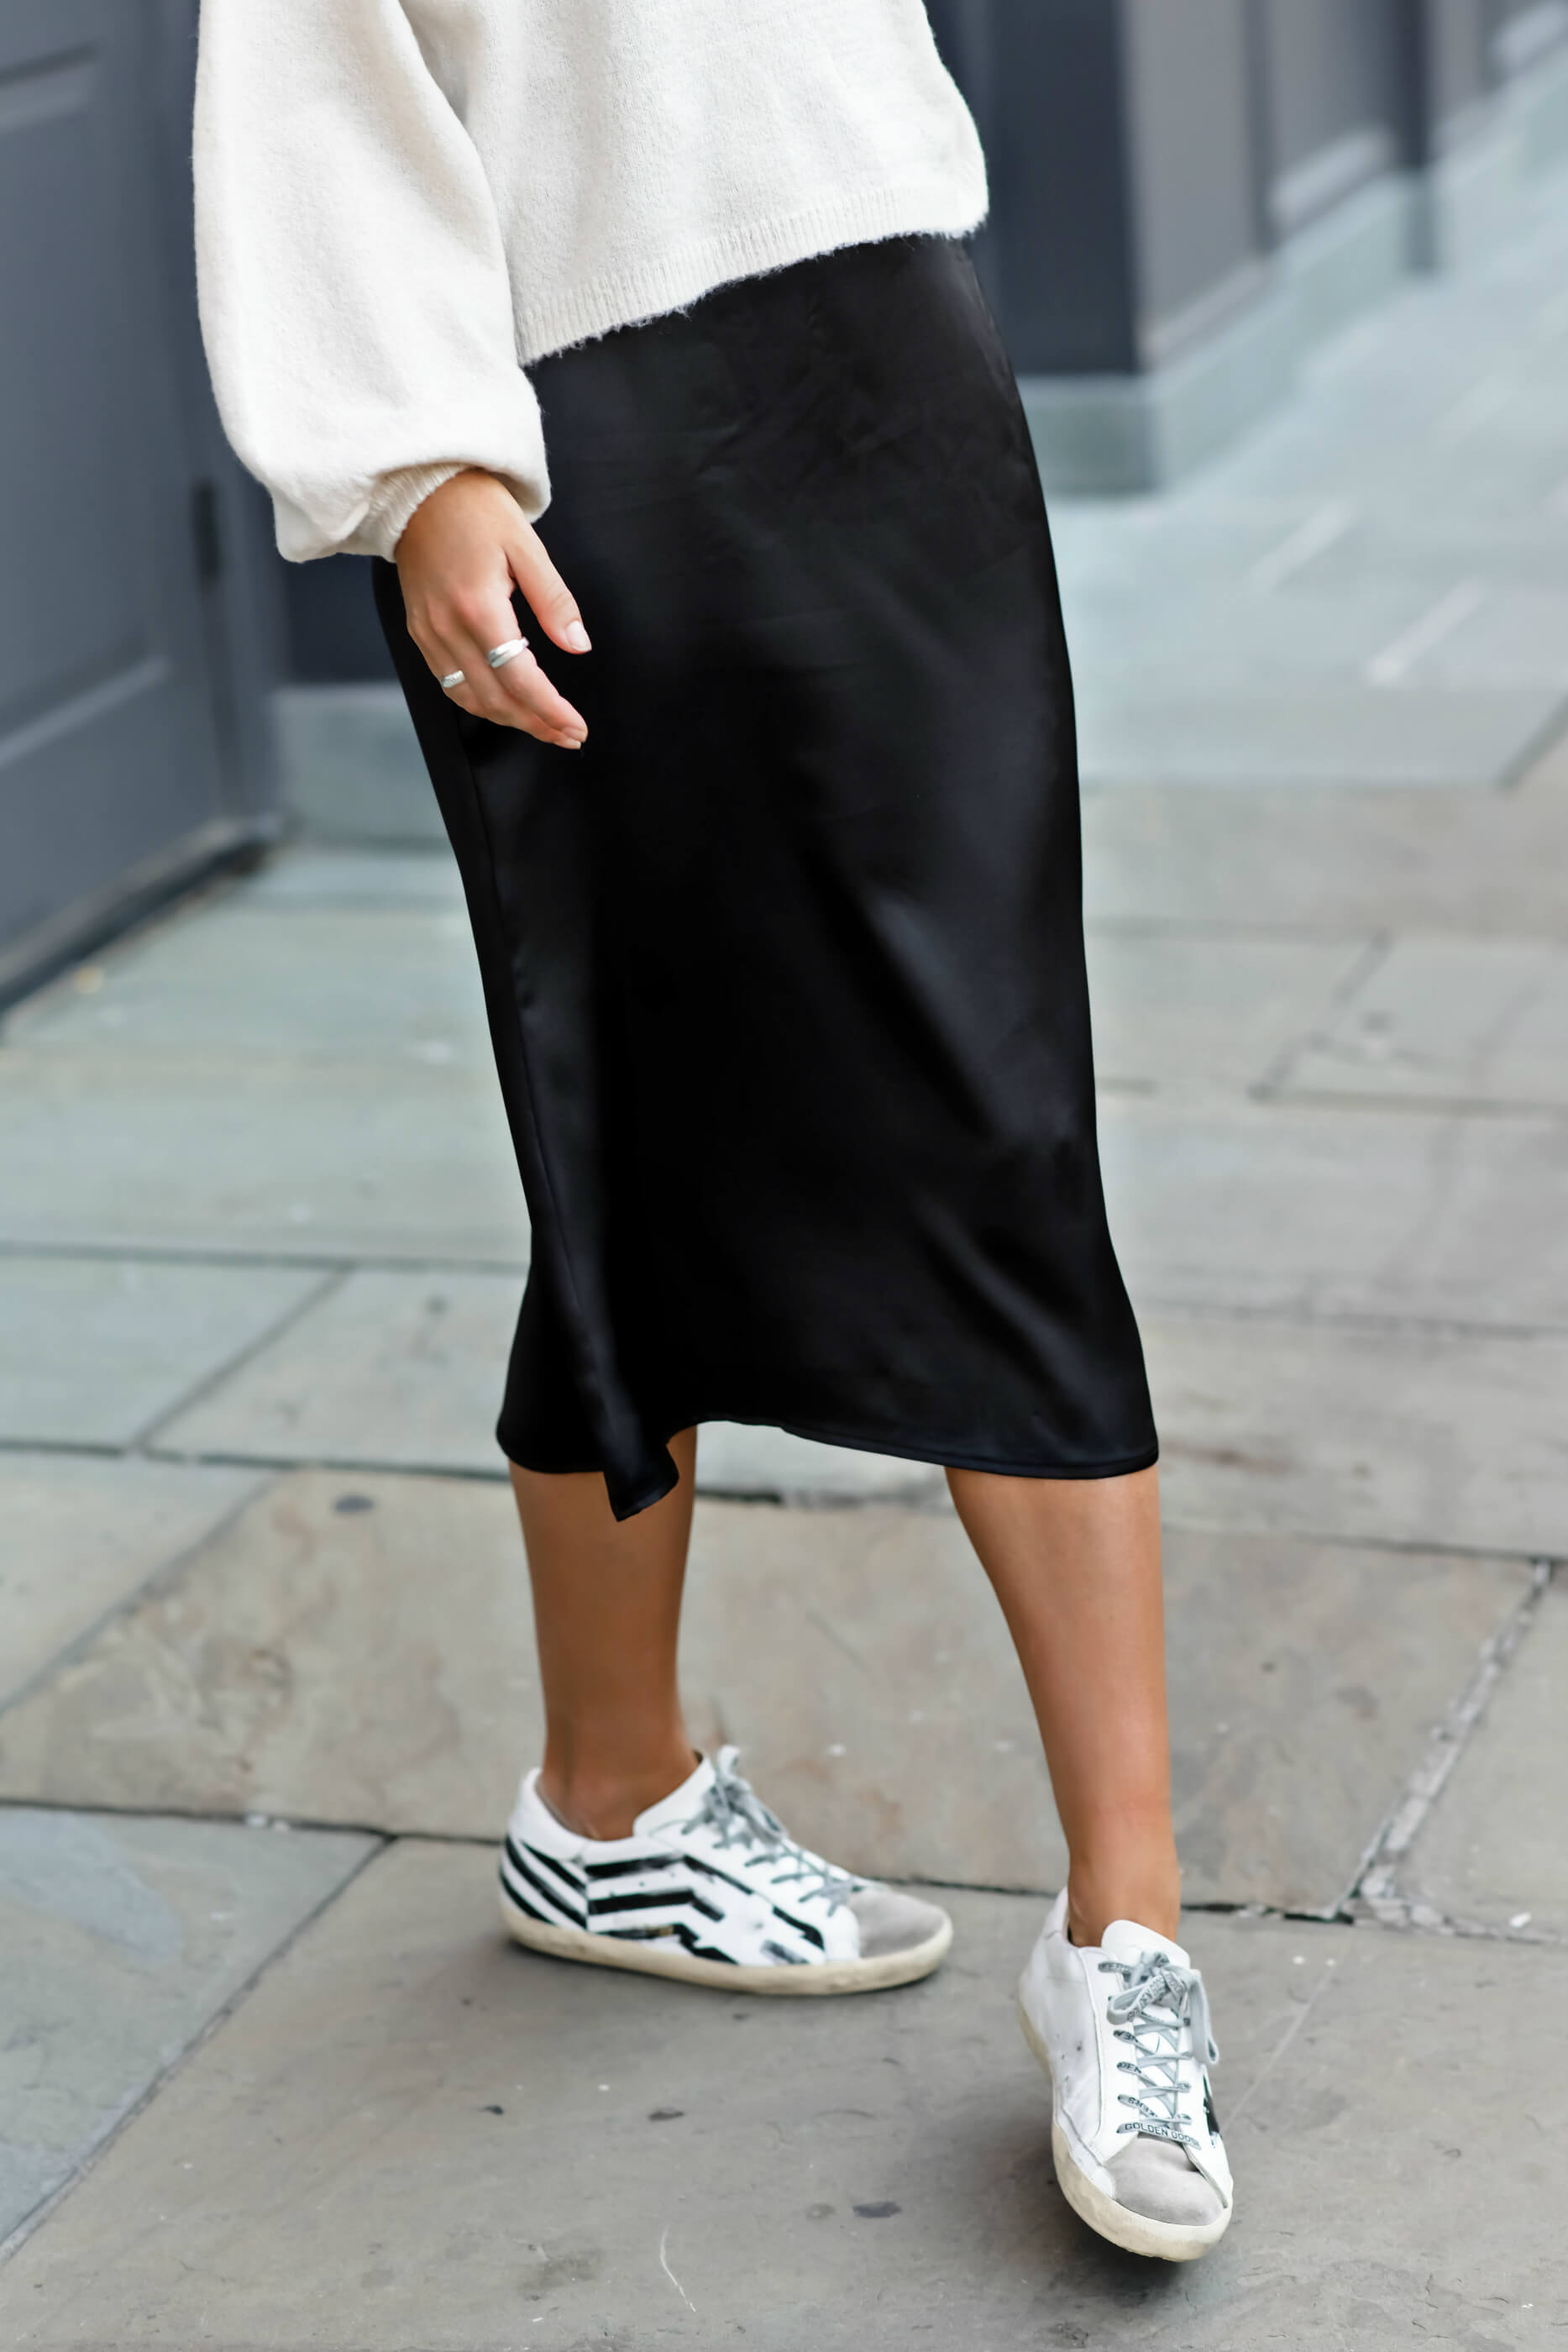 Two Ways To Style A Satin Midi Skirt, Skirt & Sweater Outfit With Golden Goose Superstar Sneakers, Fall Style, Lucki Clover Boutique, Tilden of To Be Bright